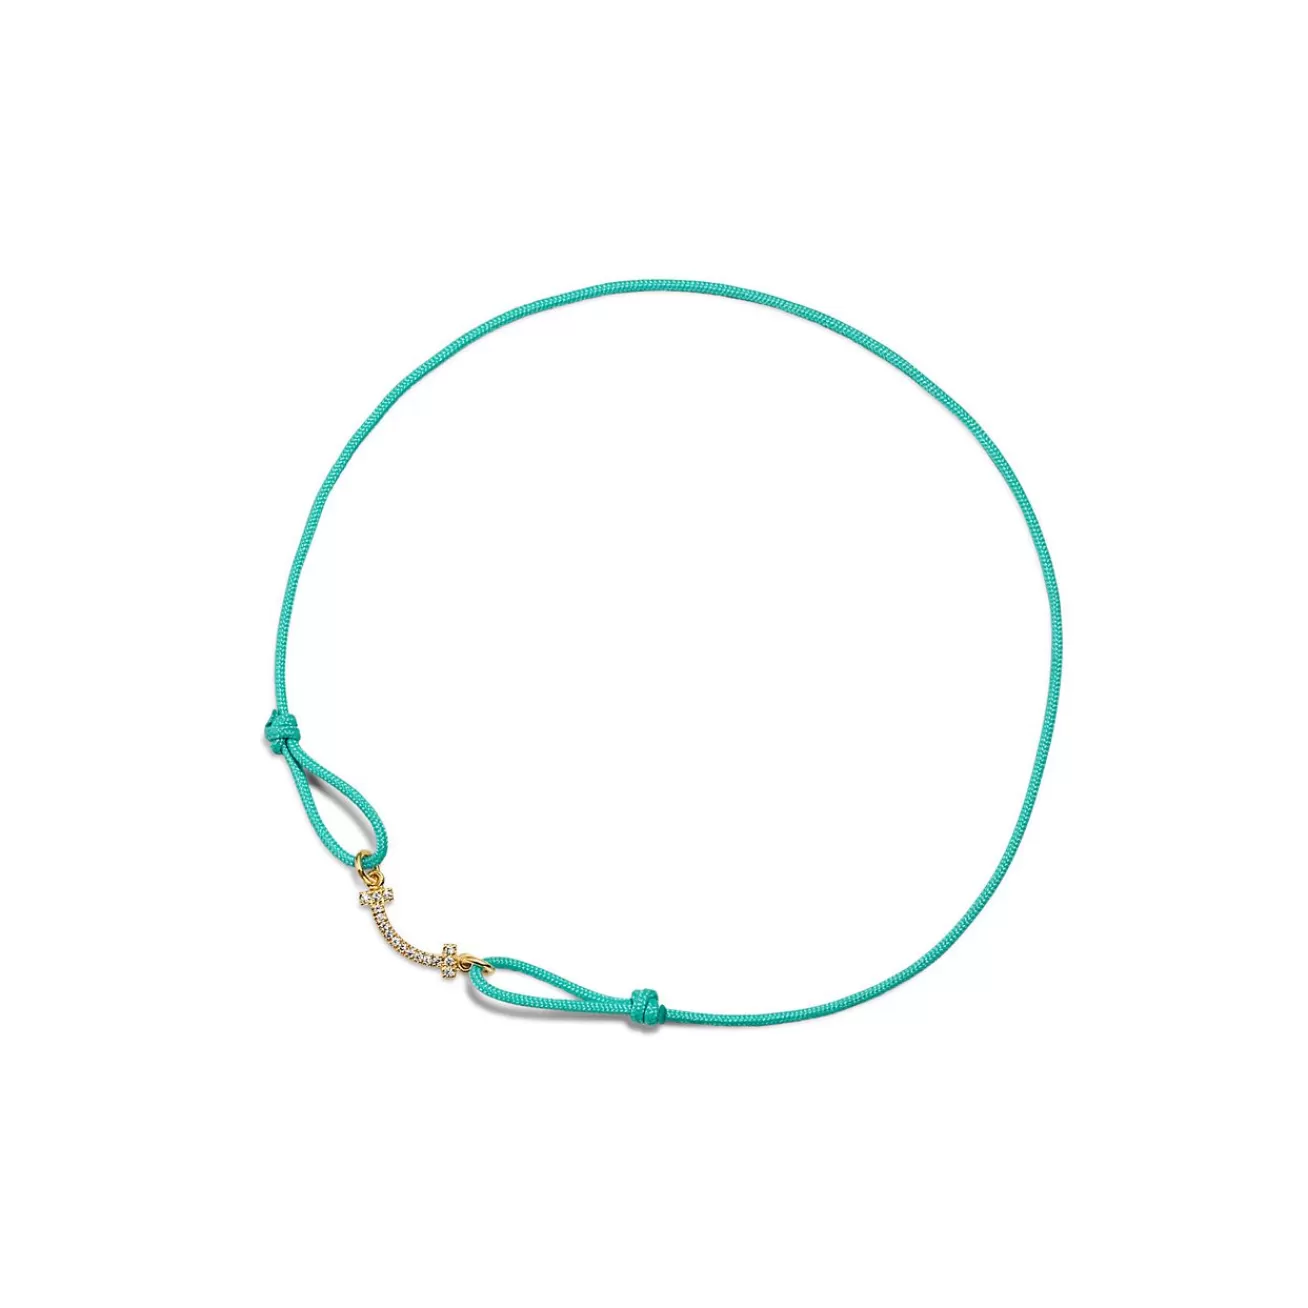 Tiffany & Co. Tiffany T Smile Bracelet in Yellow Gold on a Blue Cord with Diamonds | ^ Bracelets | Gifts for Her